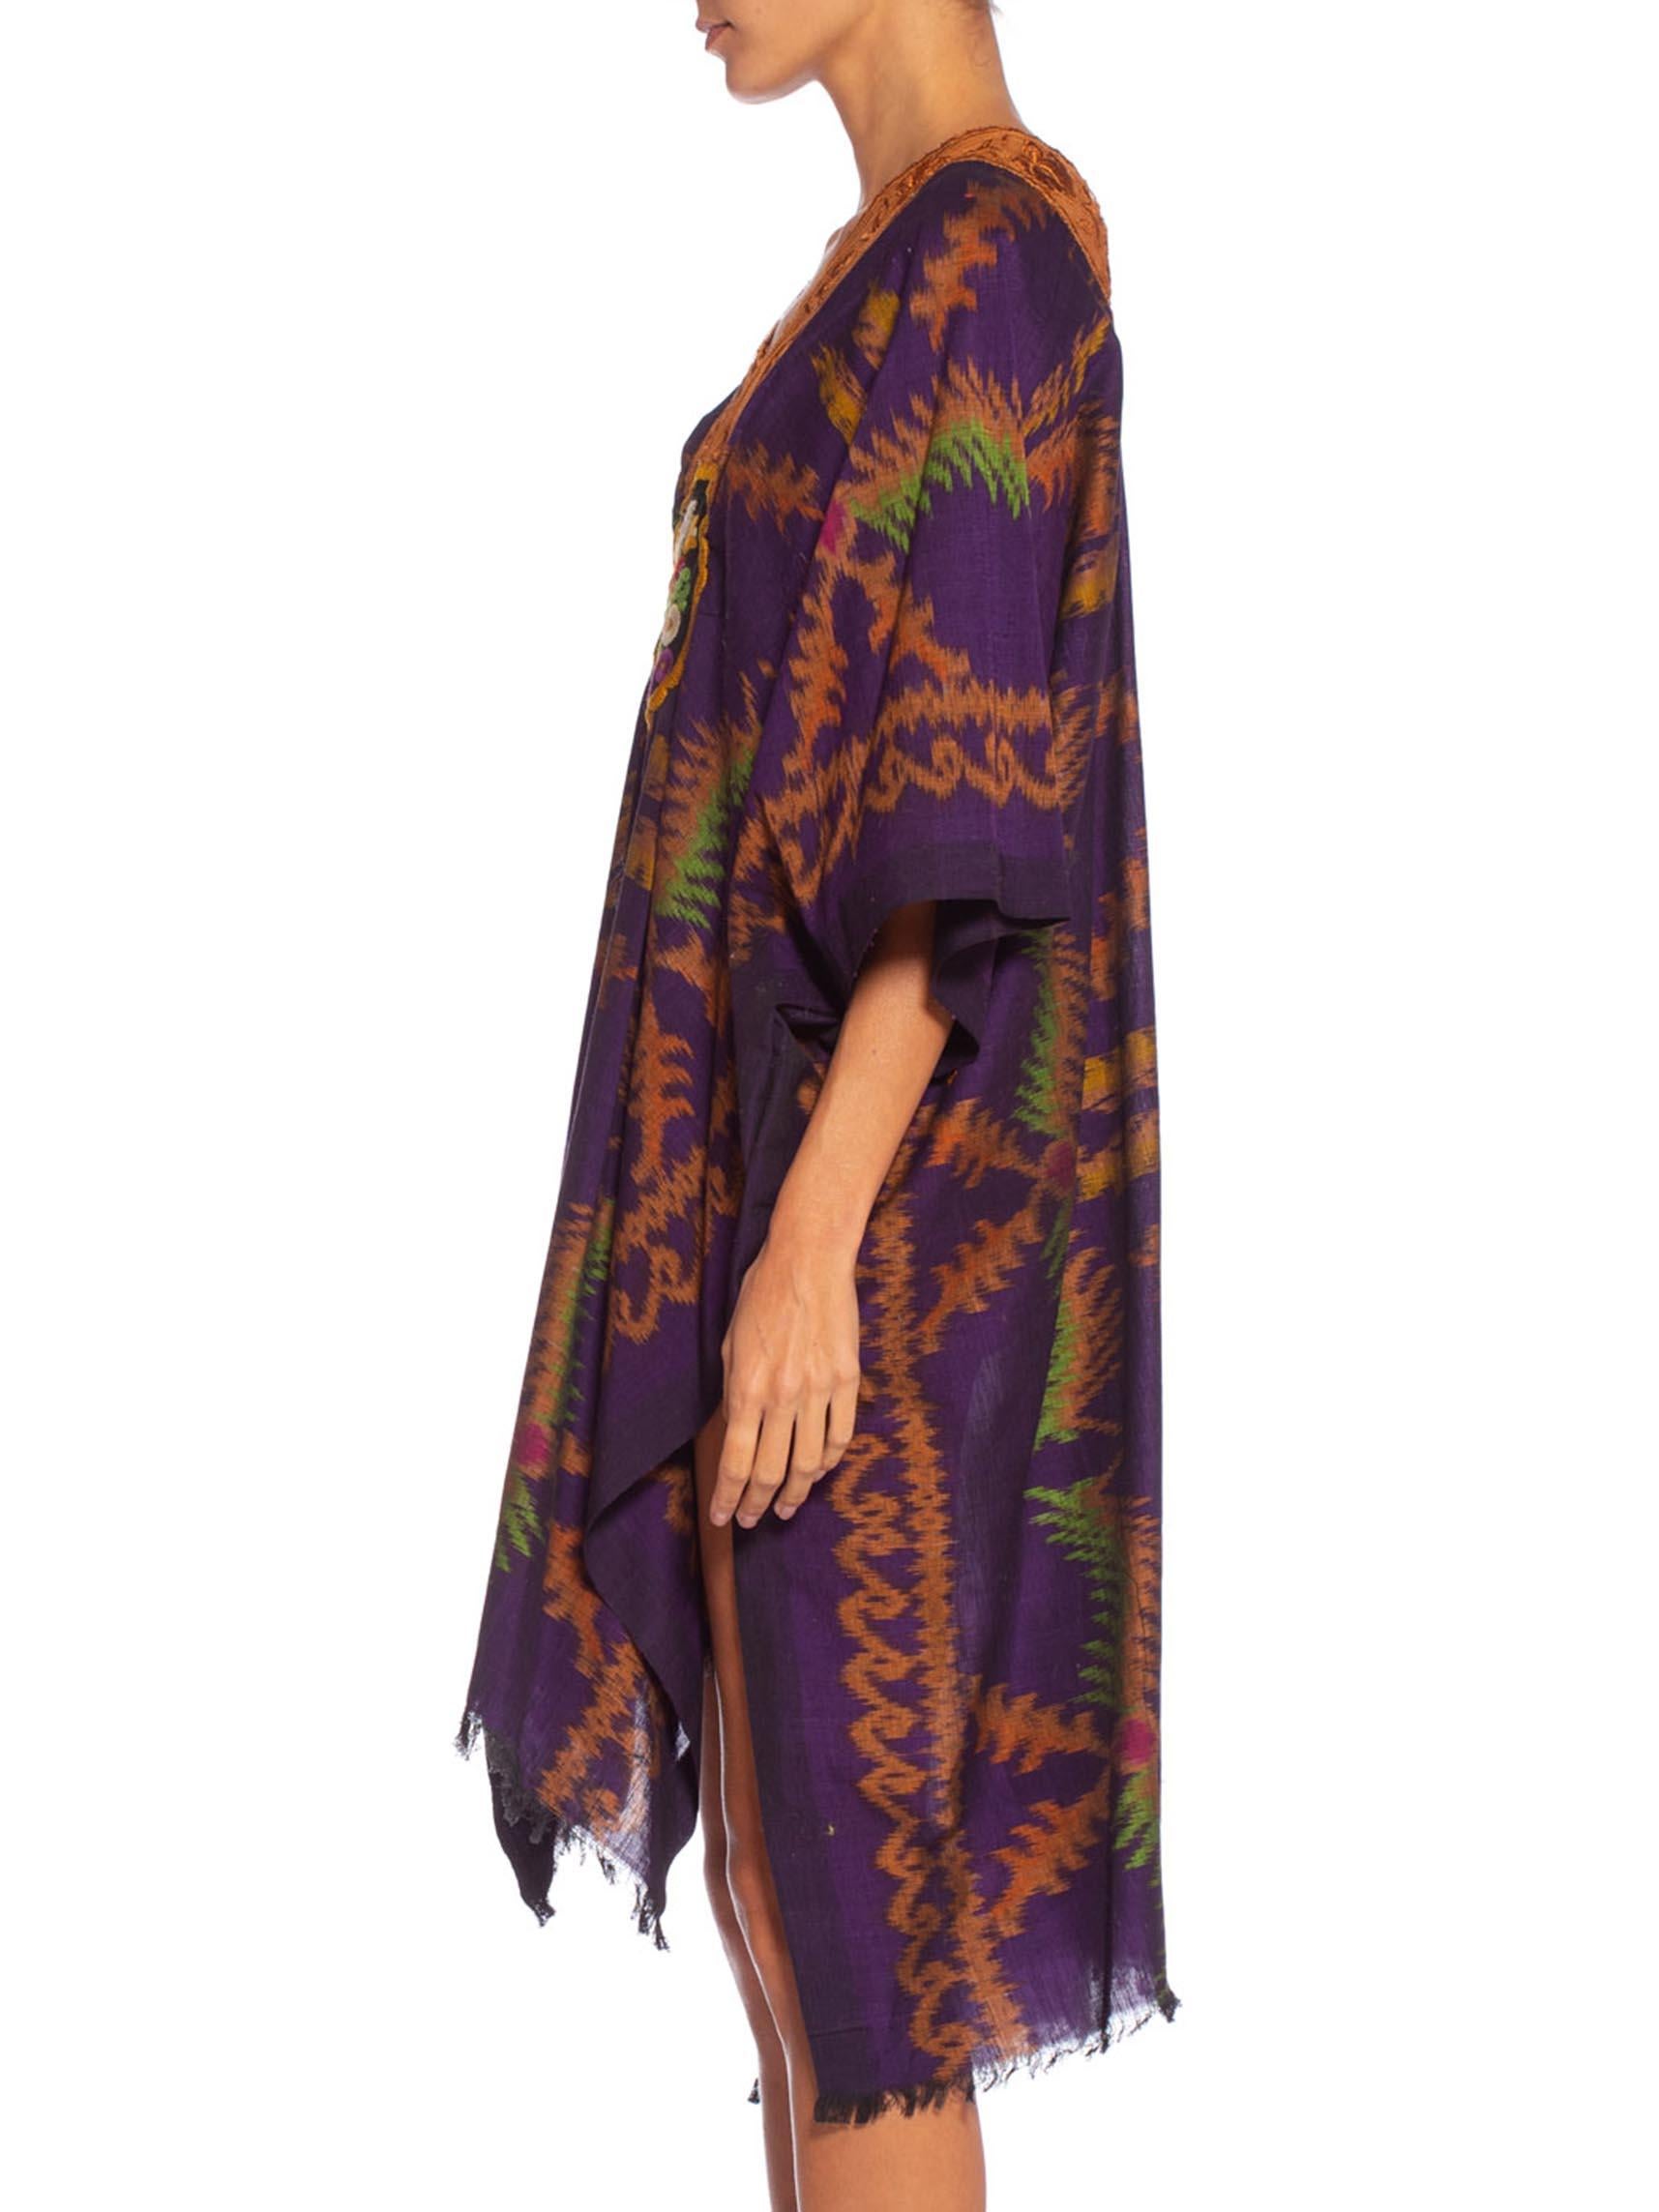 MORPHEW COLLECTION Purple & Brown Silk Ikat Kaftan Handmade With Victorian Lace For Sale 1